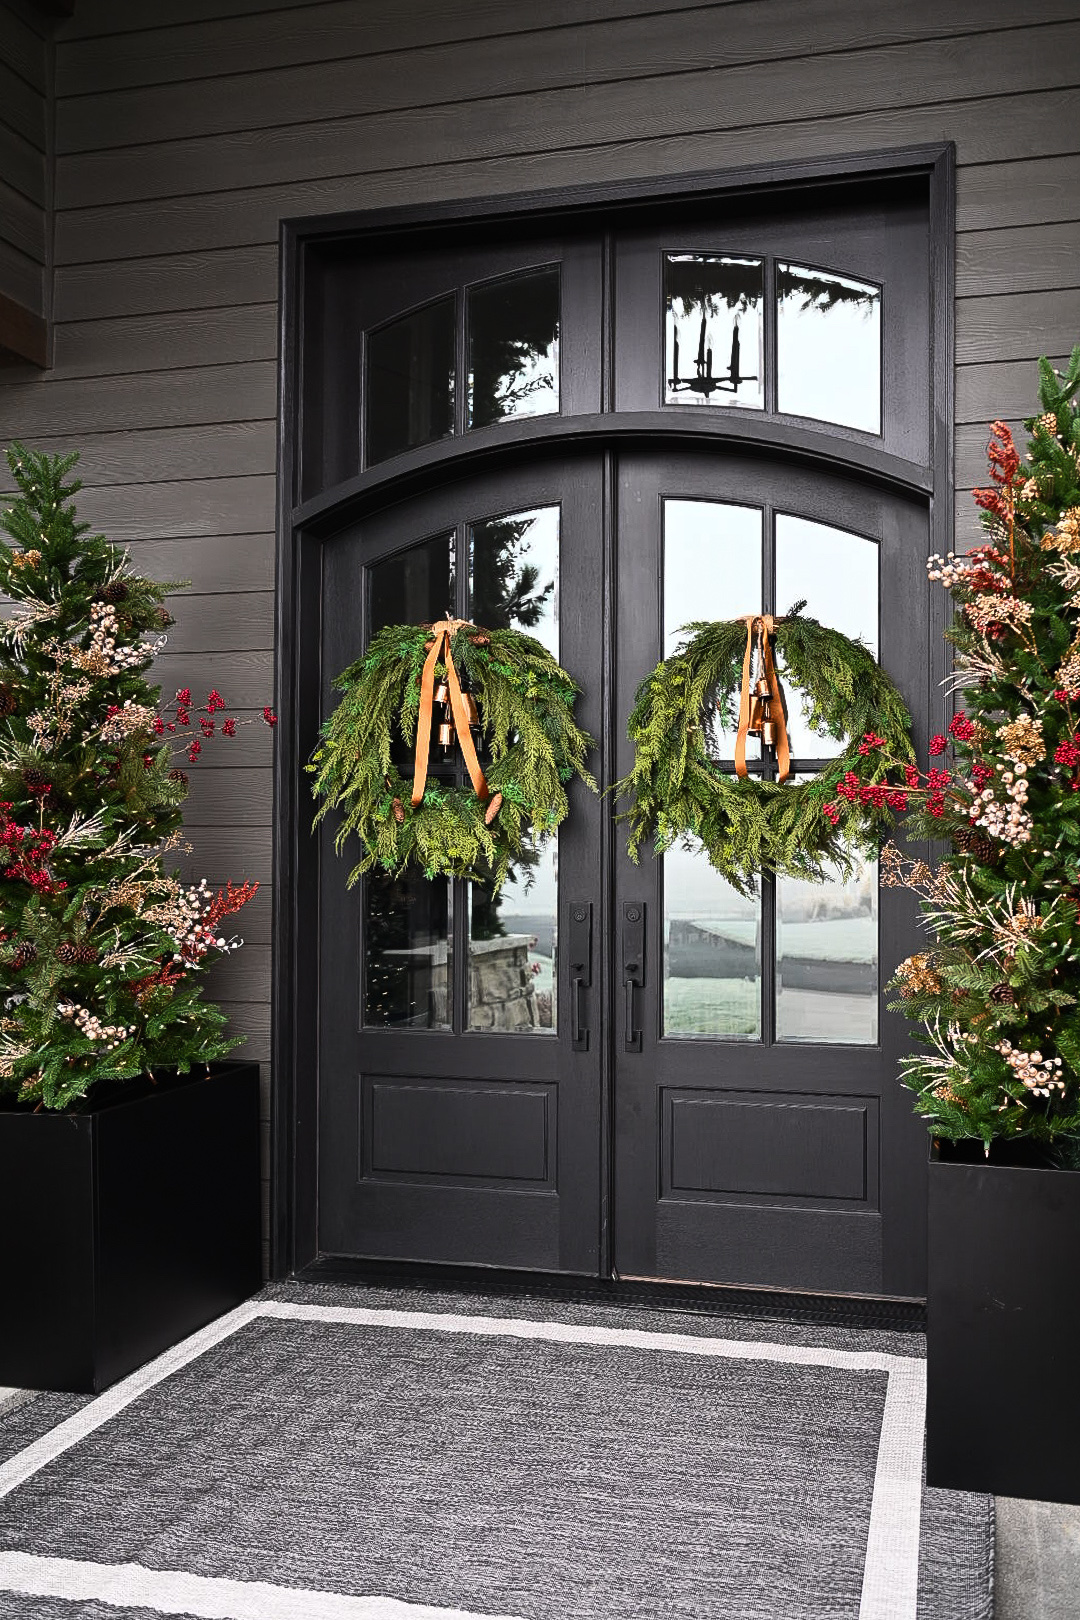 holiday home edit | my front porch | #holiday #holidayhome #holidayhomeedit #frontporch #chrismas #christmastree #christmaswreath #wreath #garland #ribbon #planterbox